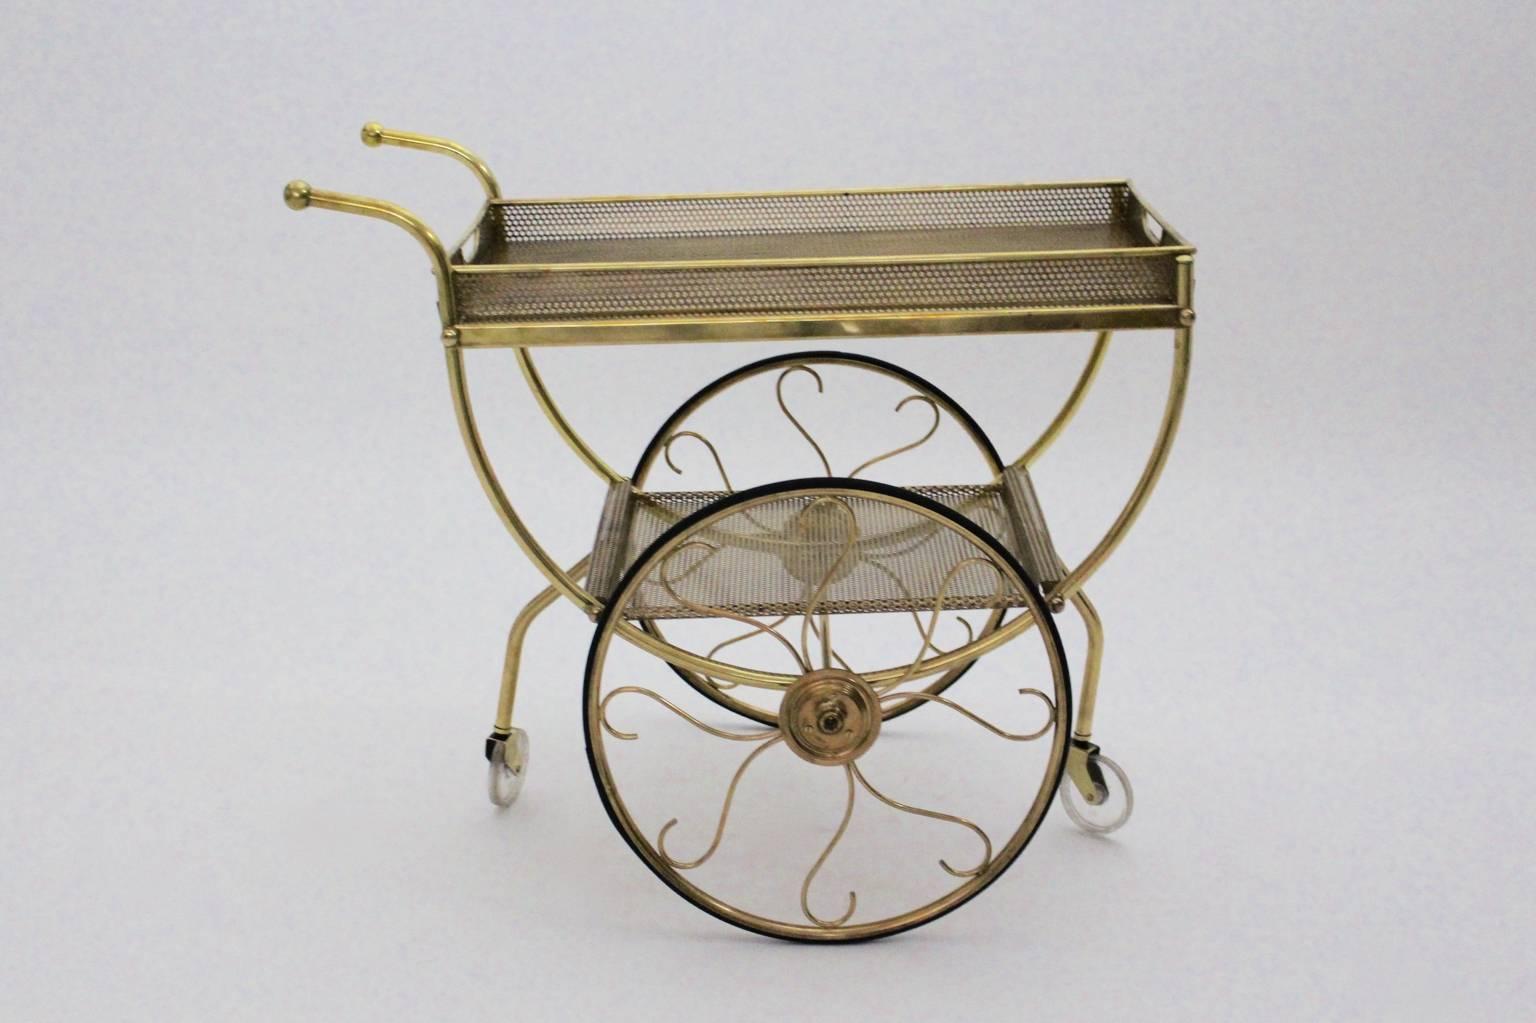 Mid century Modern vintage bar cart or serving trolley by Josef frank for Svenskt Tenn circa 1960 from brass and perforated brass.
An amazing bar cart with two perforated metal tiers, which are great to present your beloved precious things, while